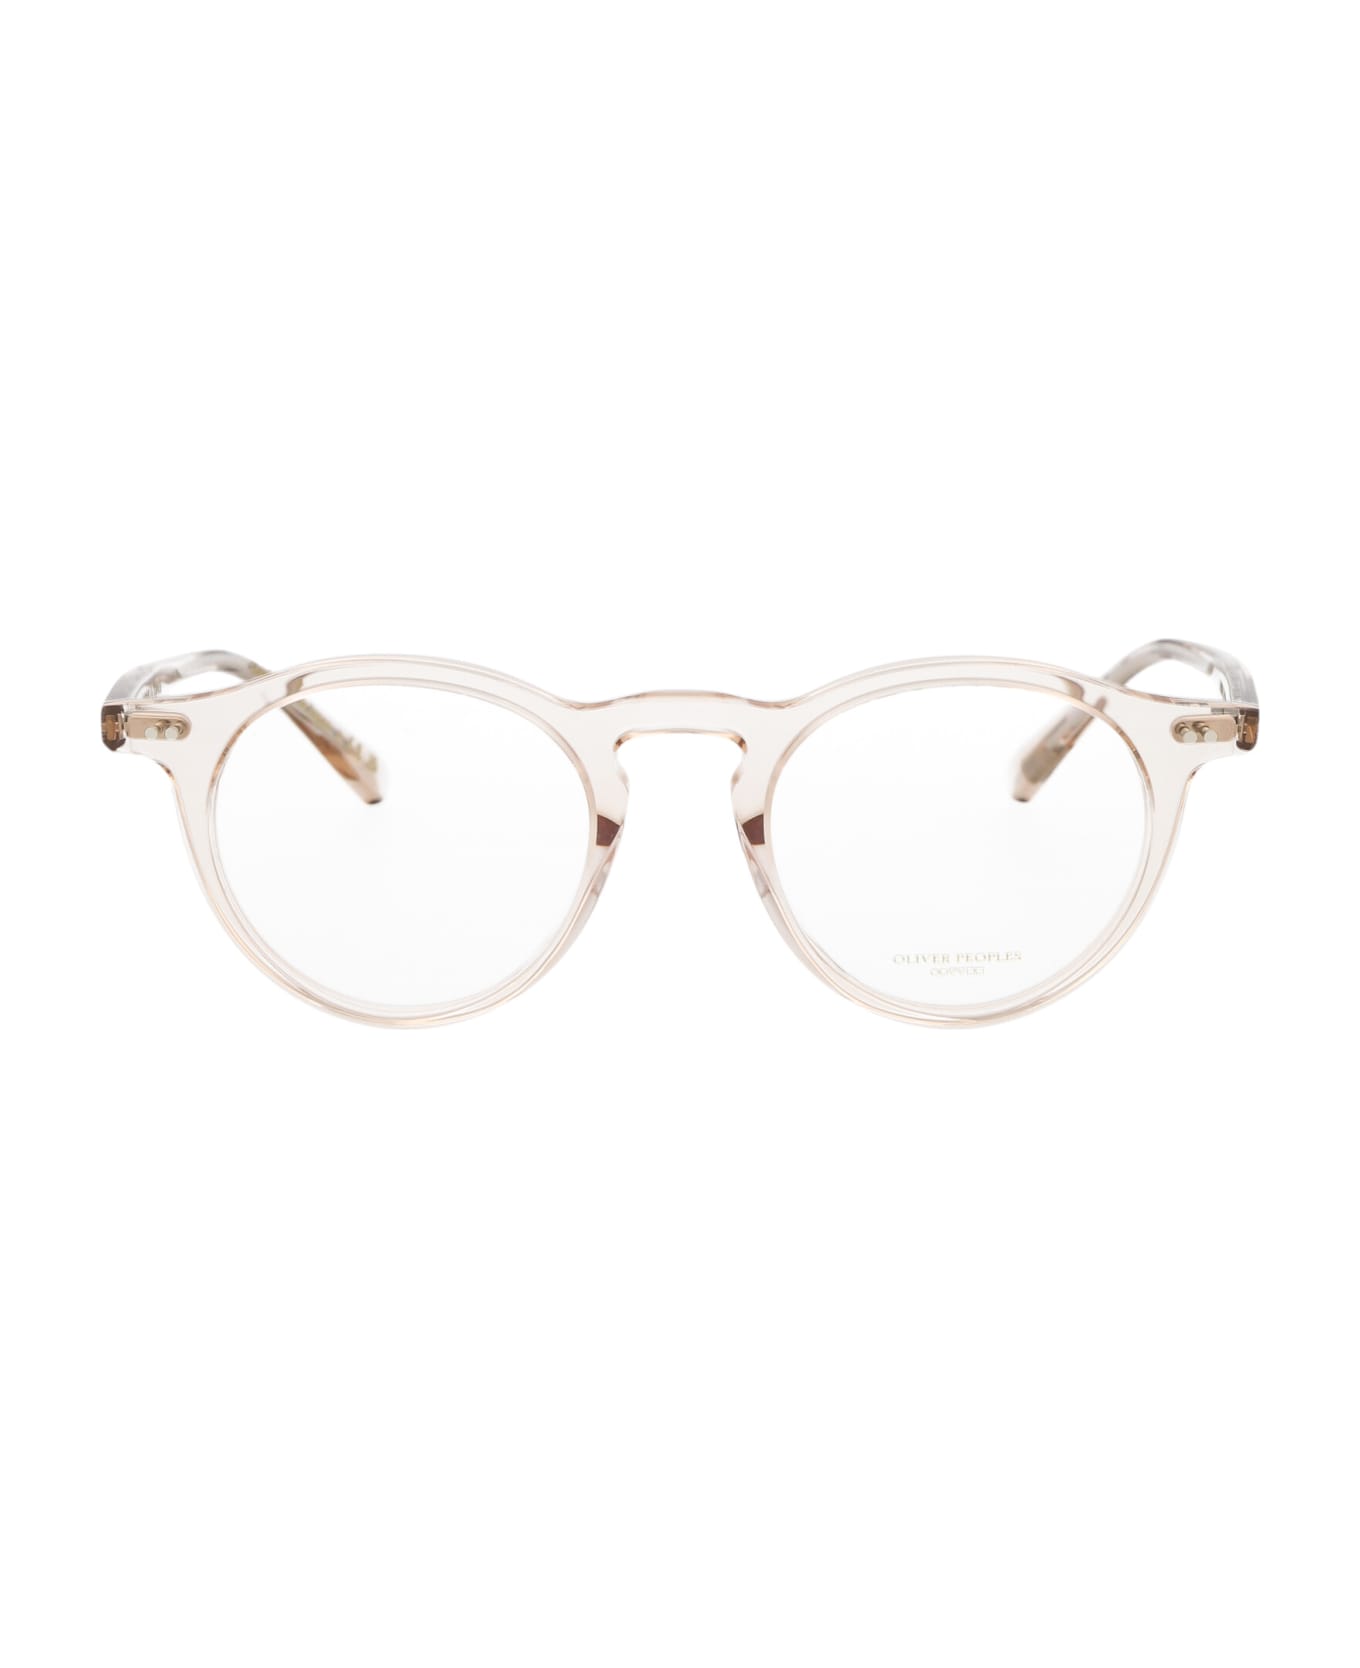 Oliver Peoples Op-13 Glasses - 1743 Cherry Blossom